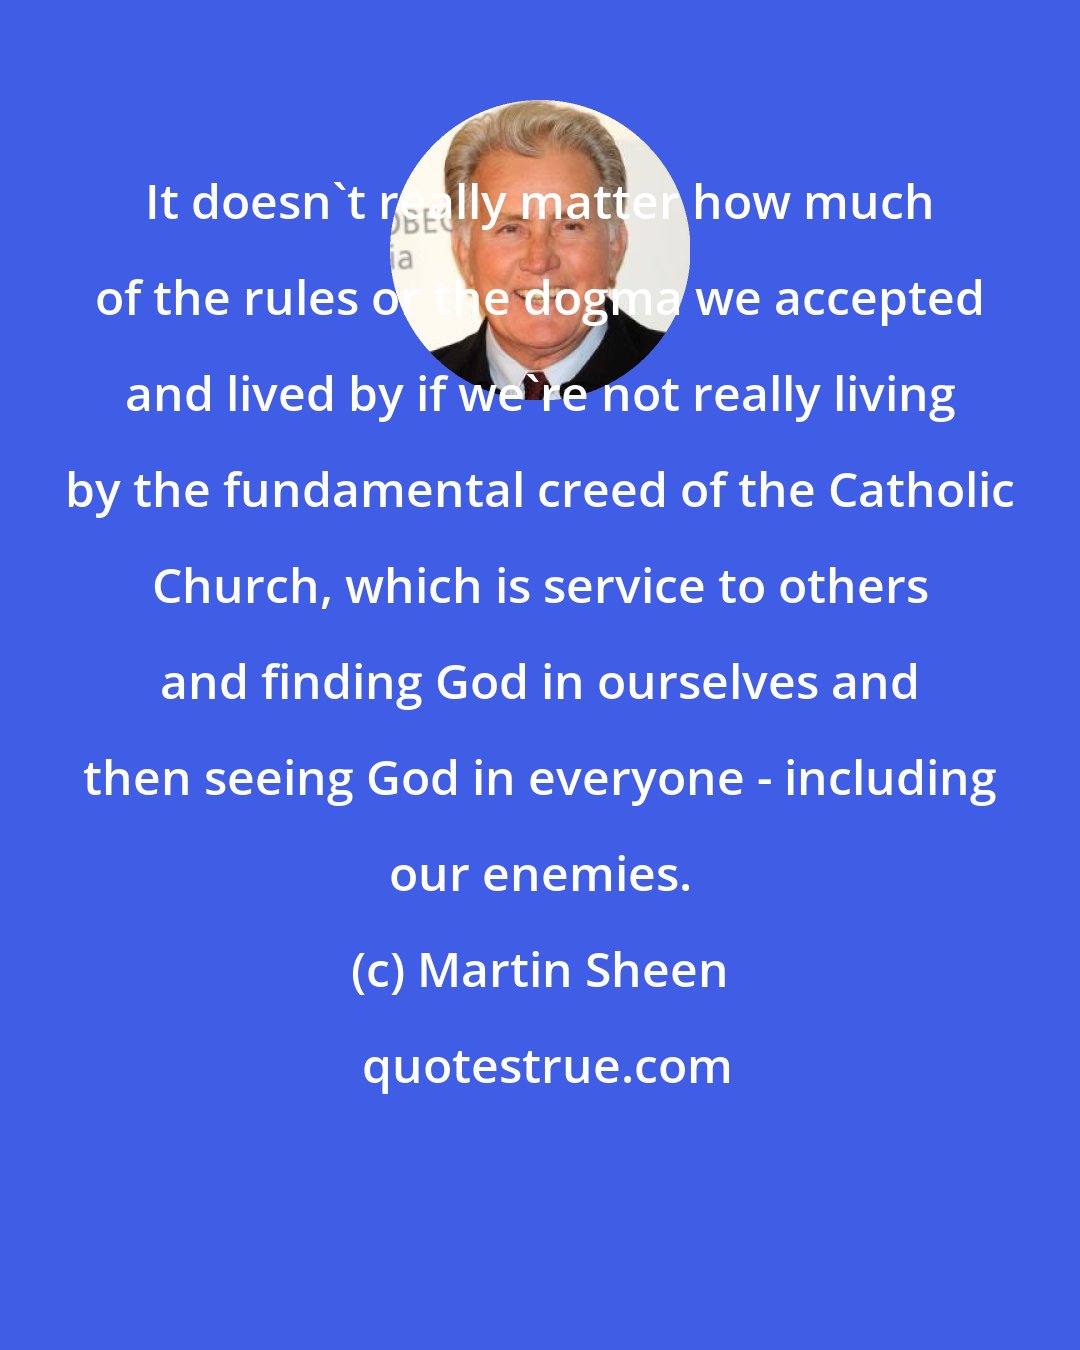 Martin Sheen: It doesn't really matter how much of the rules or the dogma we accepted and lived by if we're not really living by the fundamental creed of the Catholic Church, which is service to others and finding God in ourselves and then seeing God in everyone - including our enemies.